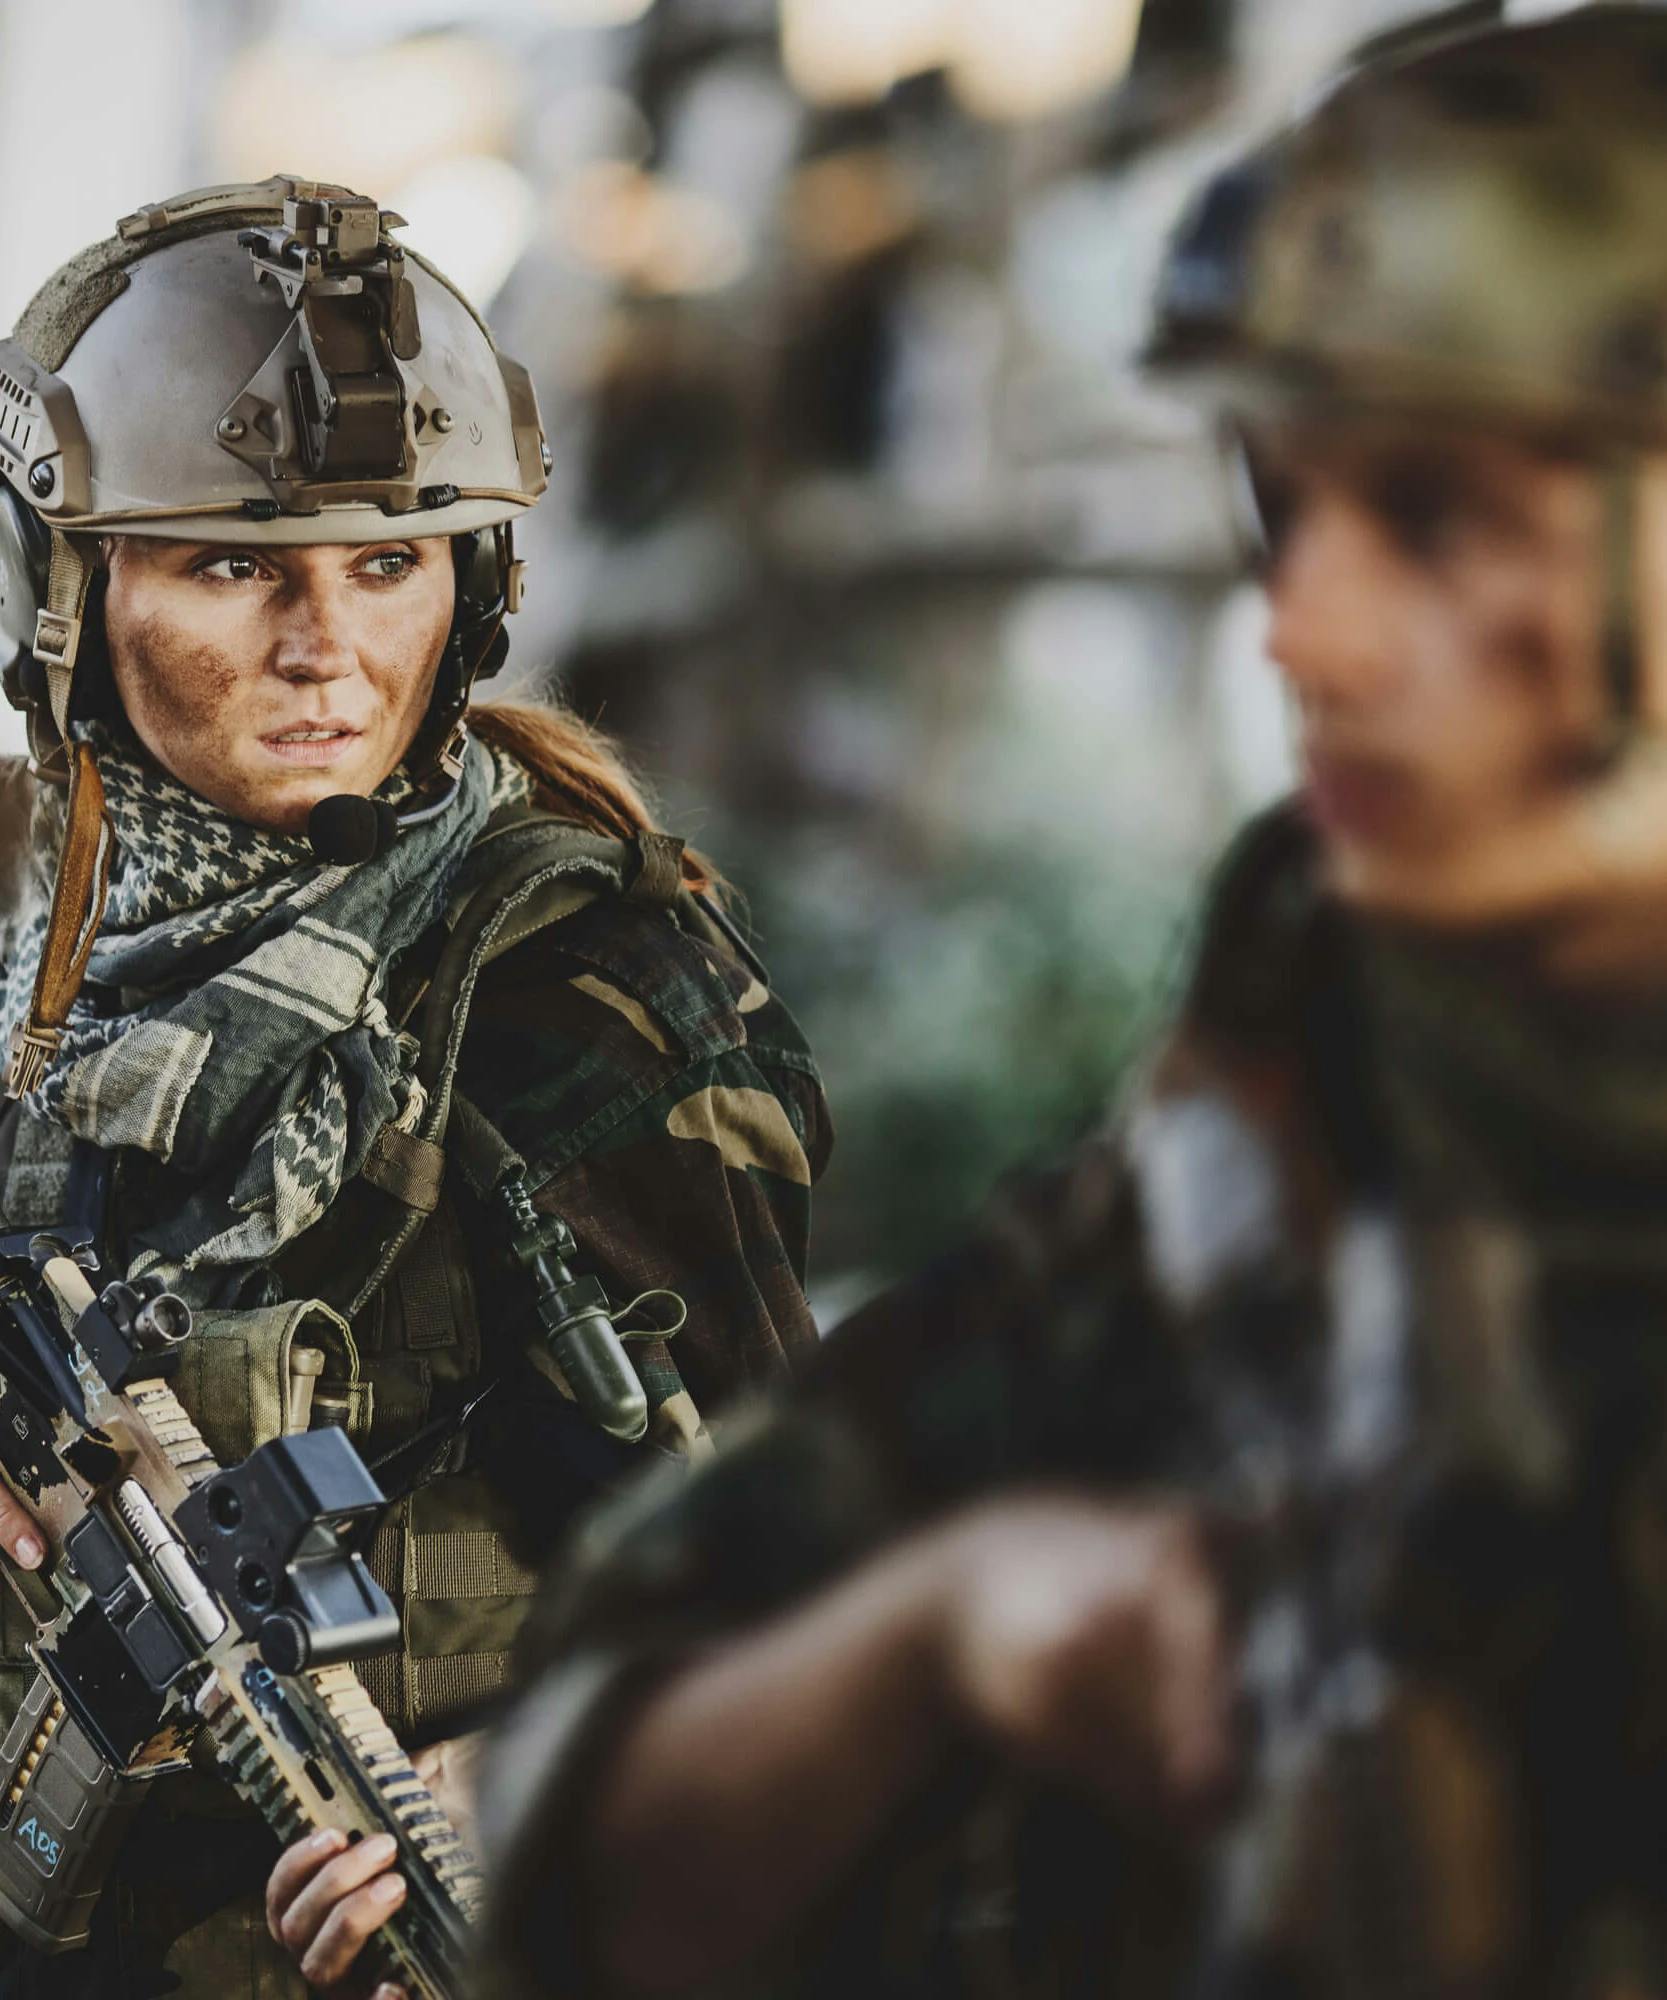 shutterstock Why Drafting Women Into The Military Will Be A Mistake